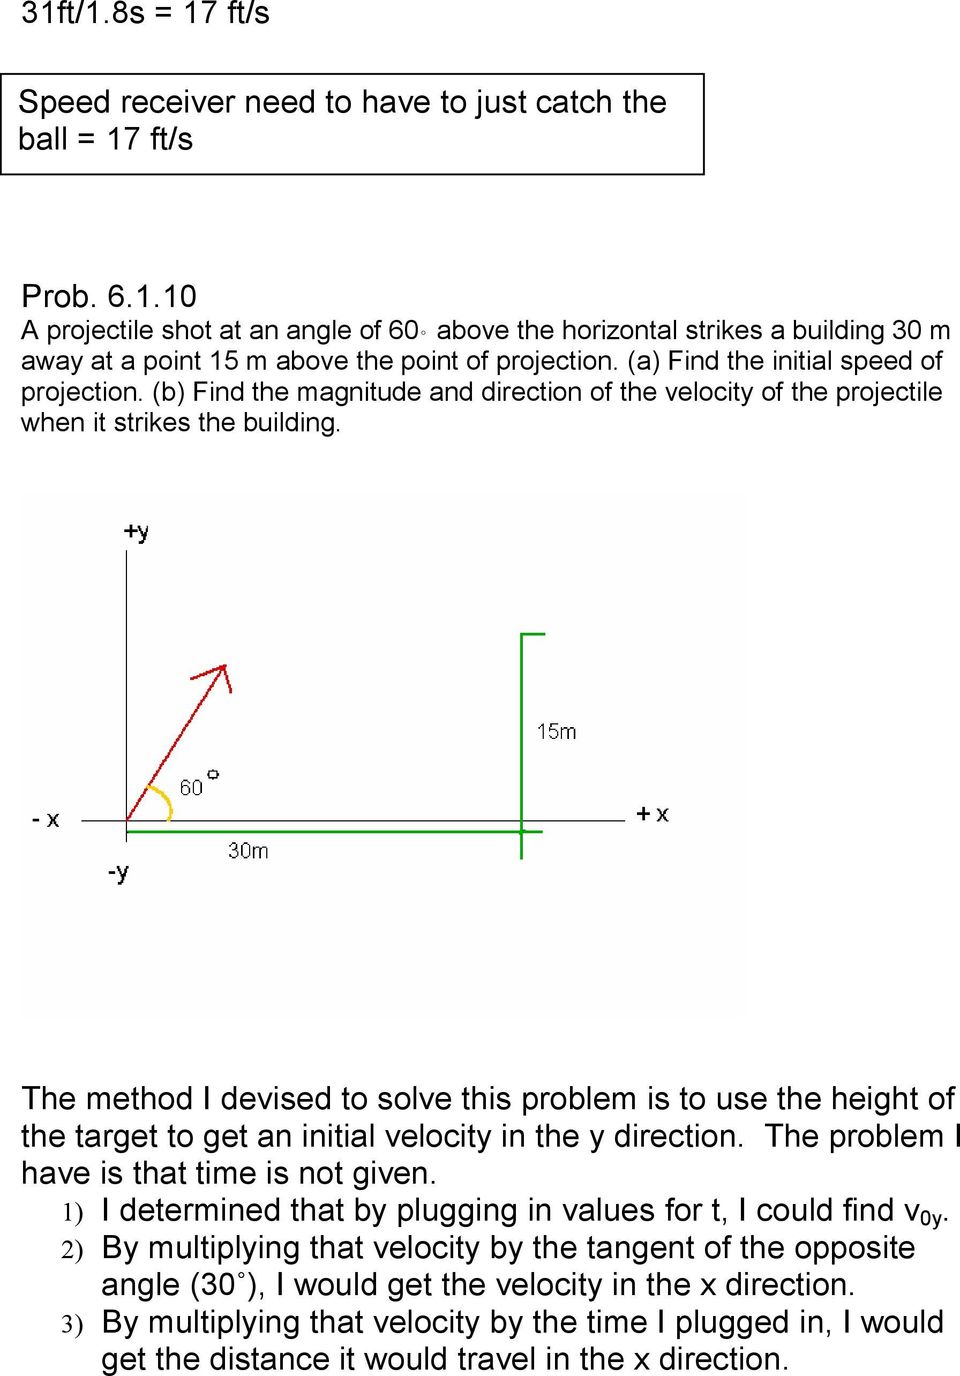 The method I devised to solve this problem is to use the height of the target to get an initial velocity in the y direction. The problem I have is that time is not given.